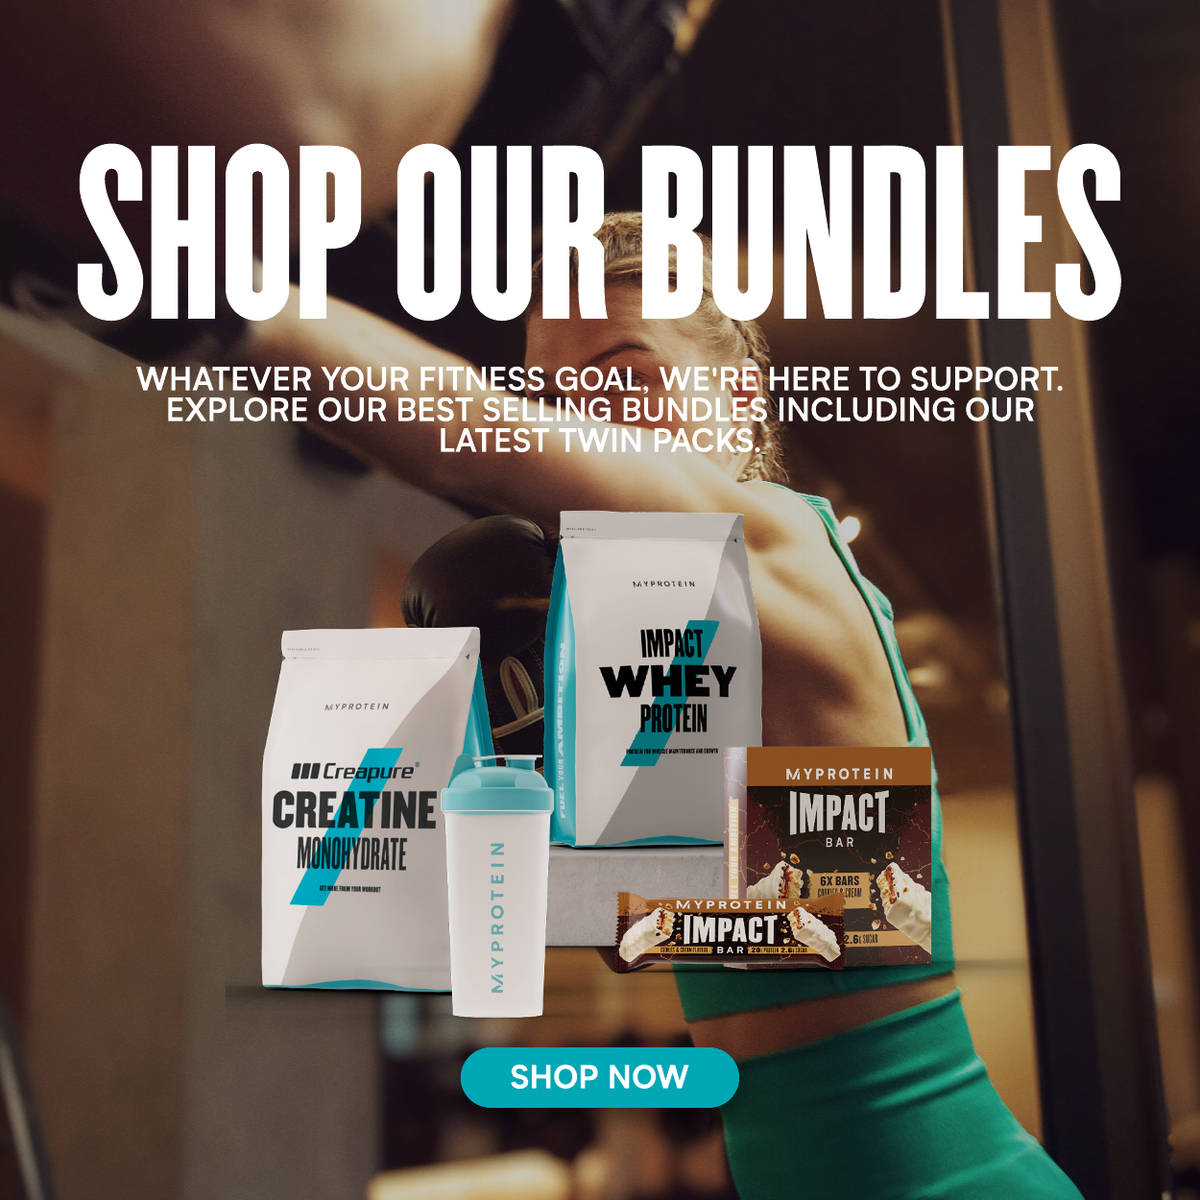 Promotional banner for bundle of products featuring Myprotein protein powders, protein bars, creatine and a shaker with a women working out.